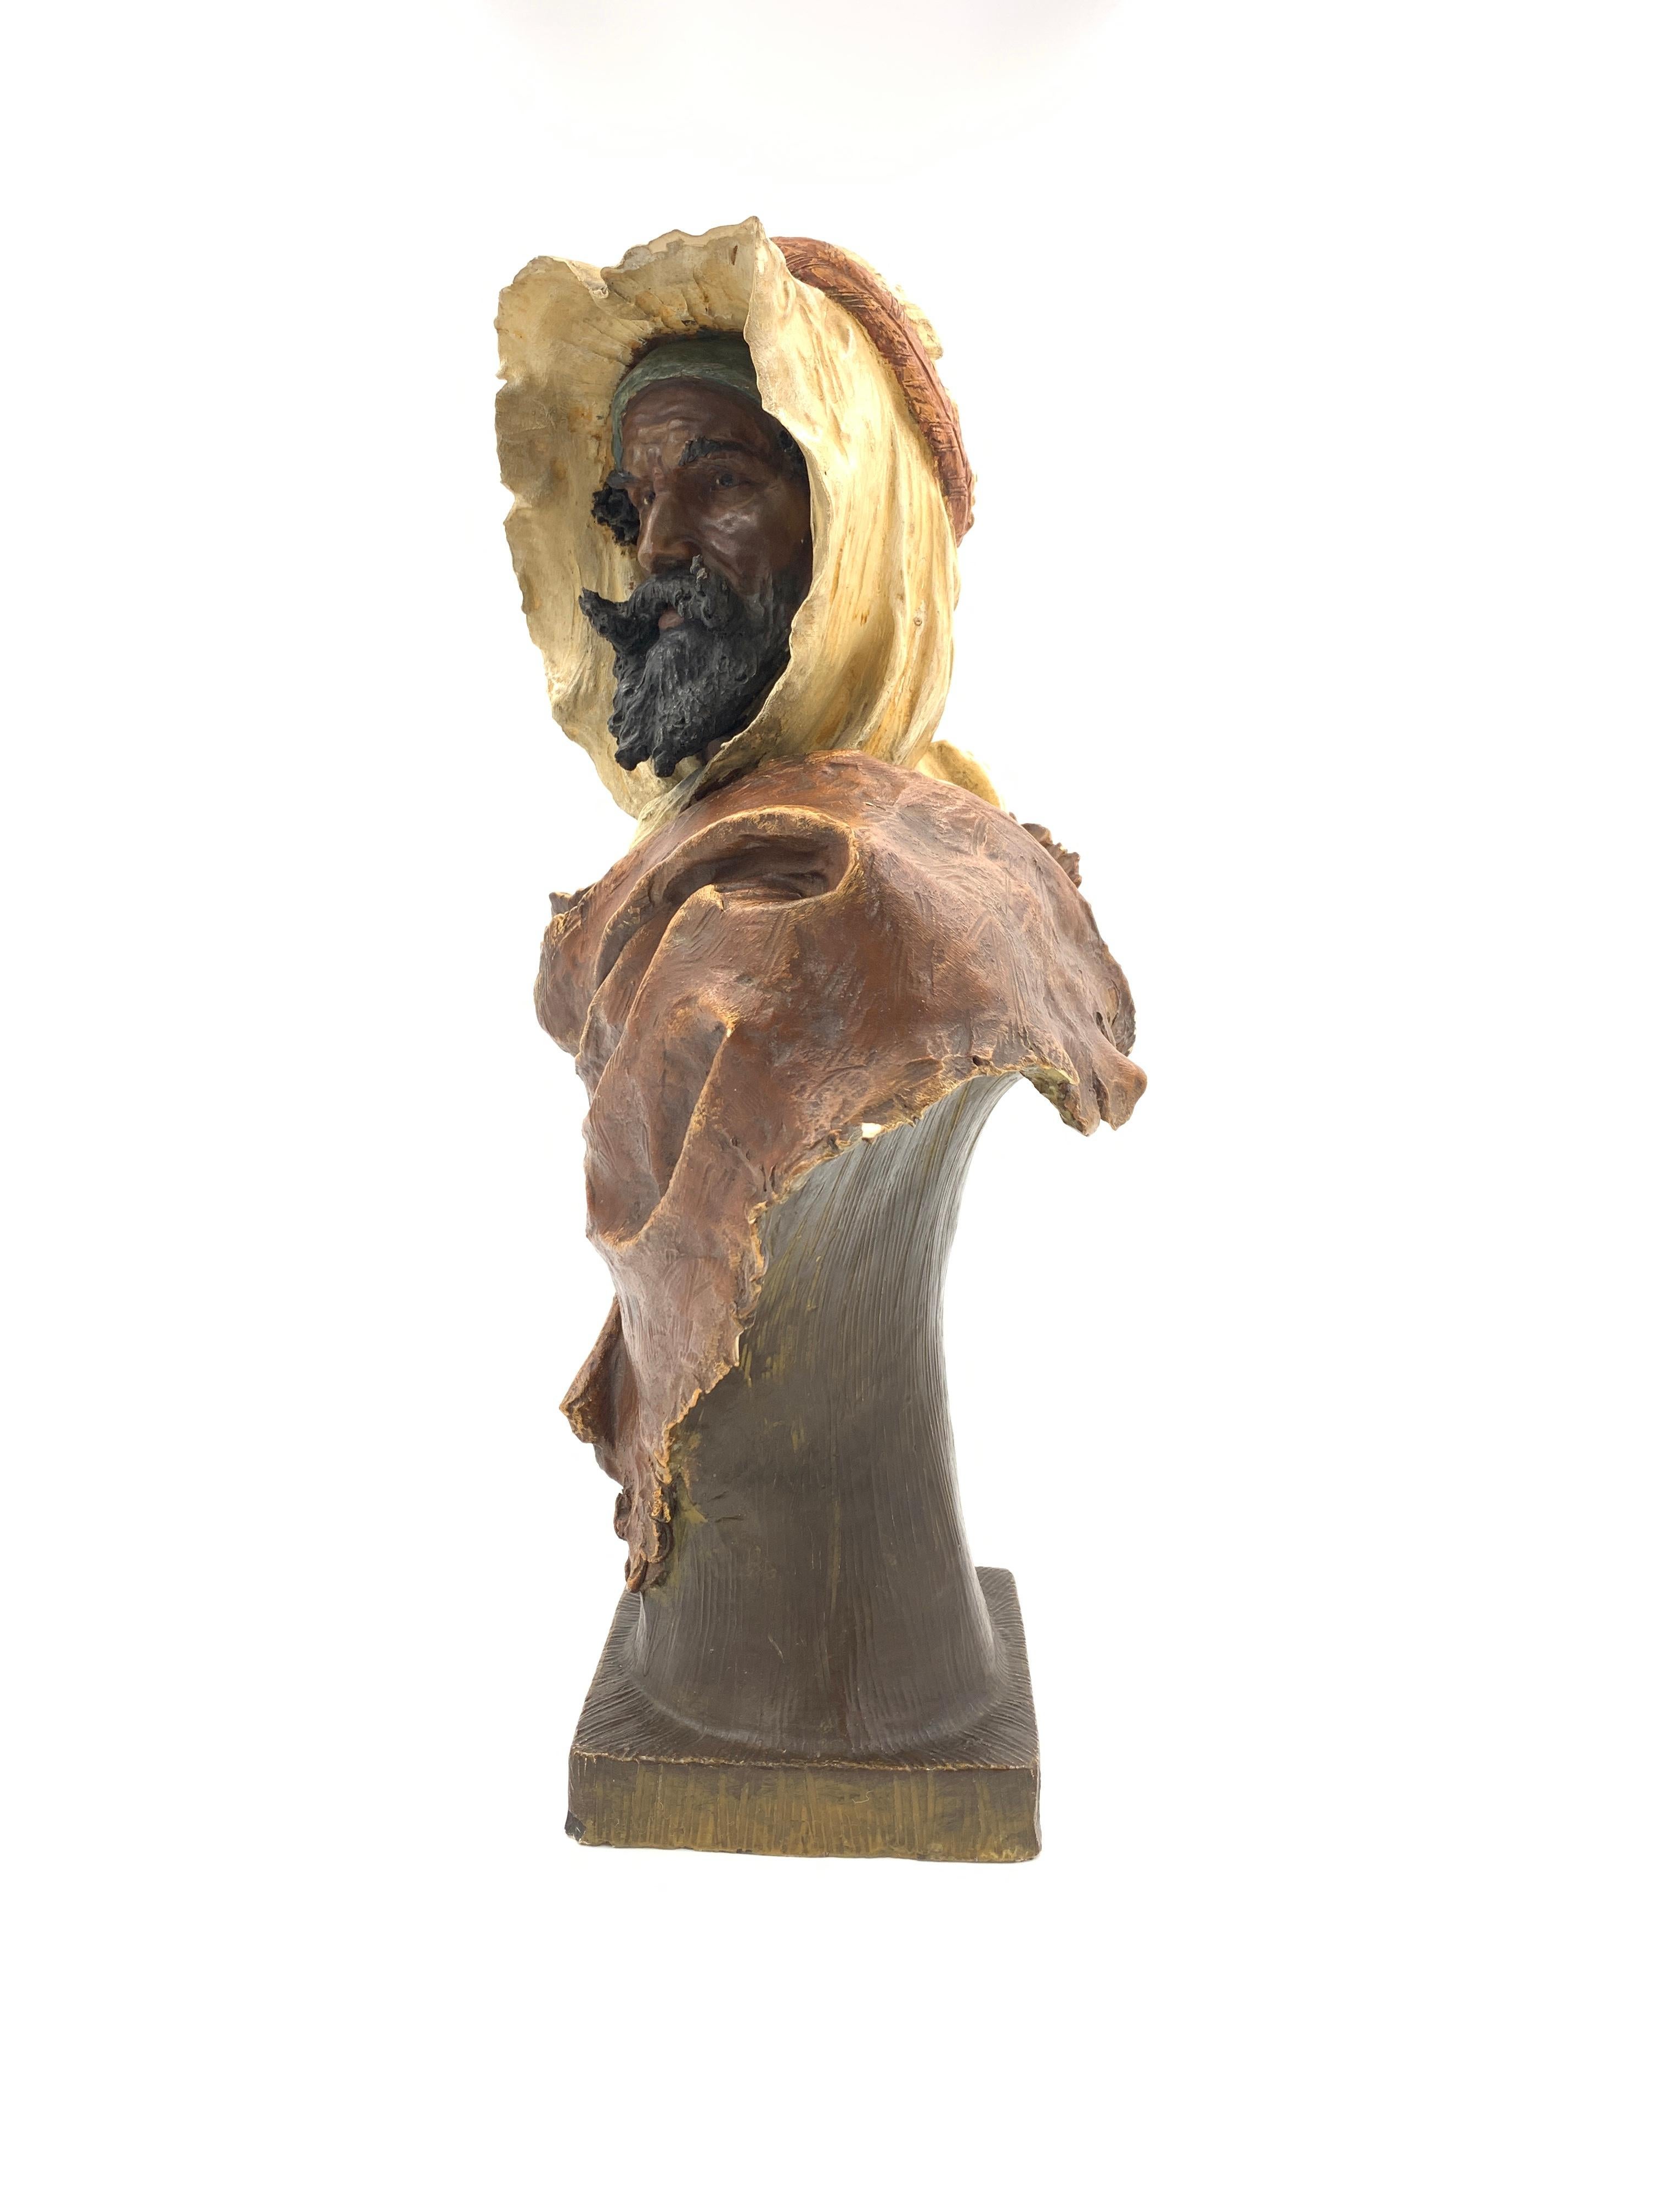 What a fierce expression is sculpted onto this Bohemian Eduard Stellmacher terracotta bust! Late 19th century.